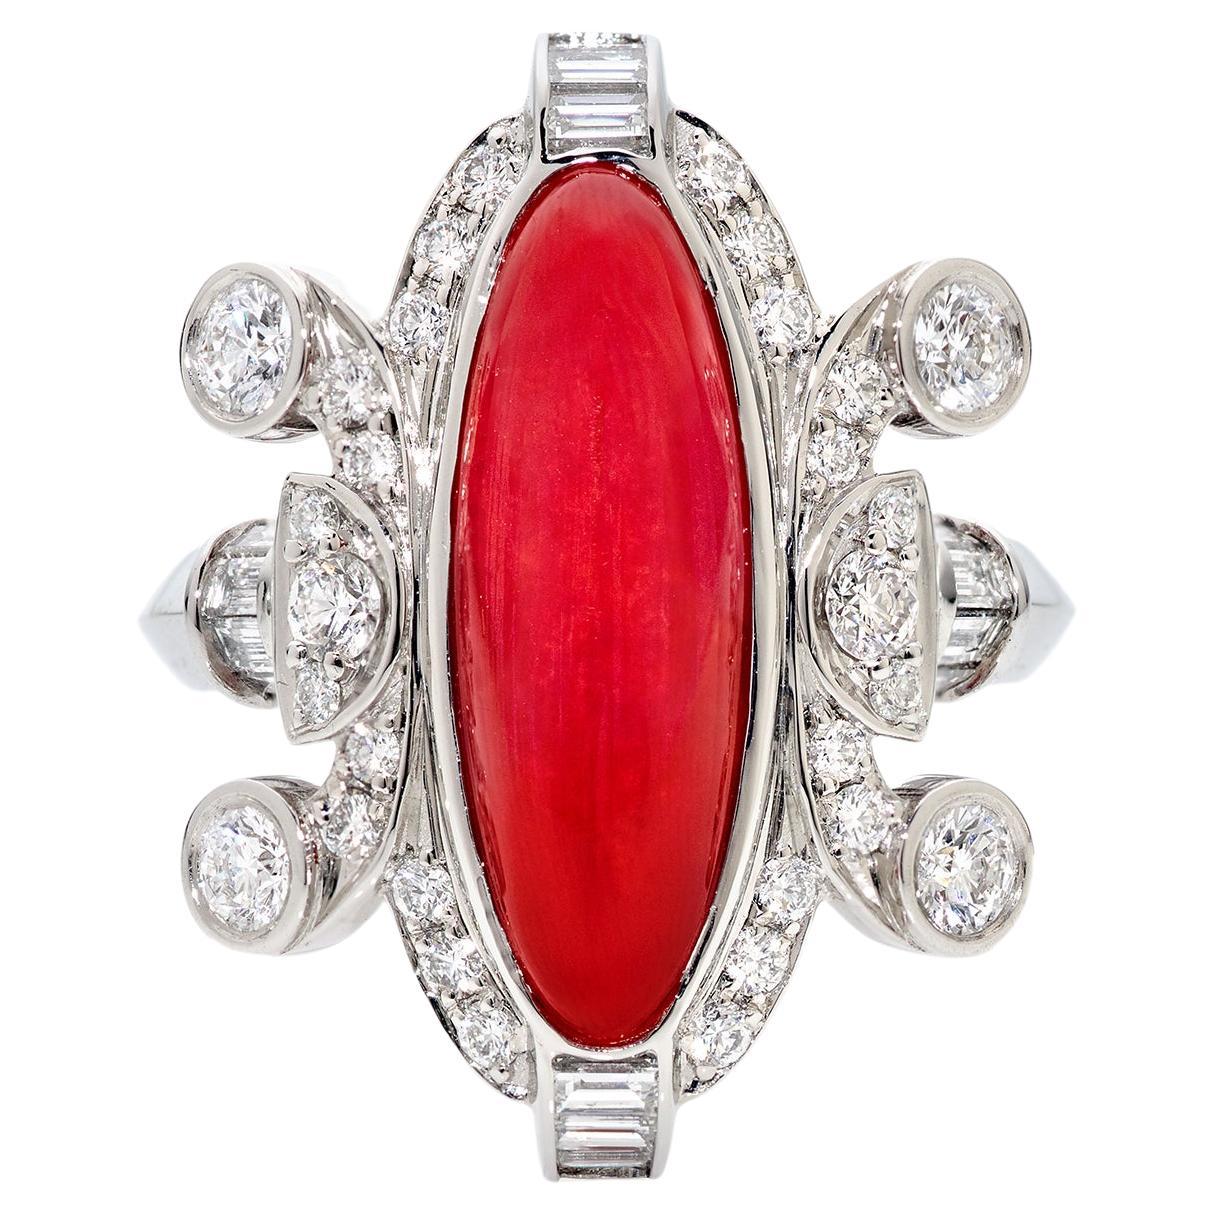 4.35 Carat Vintage Oxblood Coral and 2.07 Carats Diamond Ring Set in Platinum